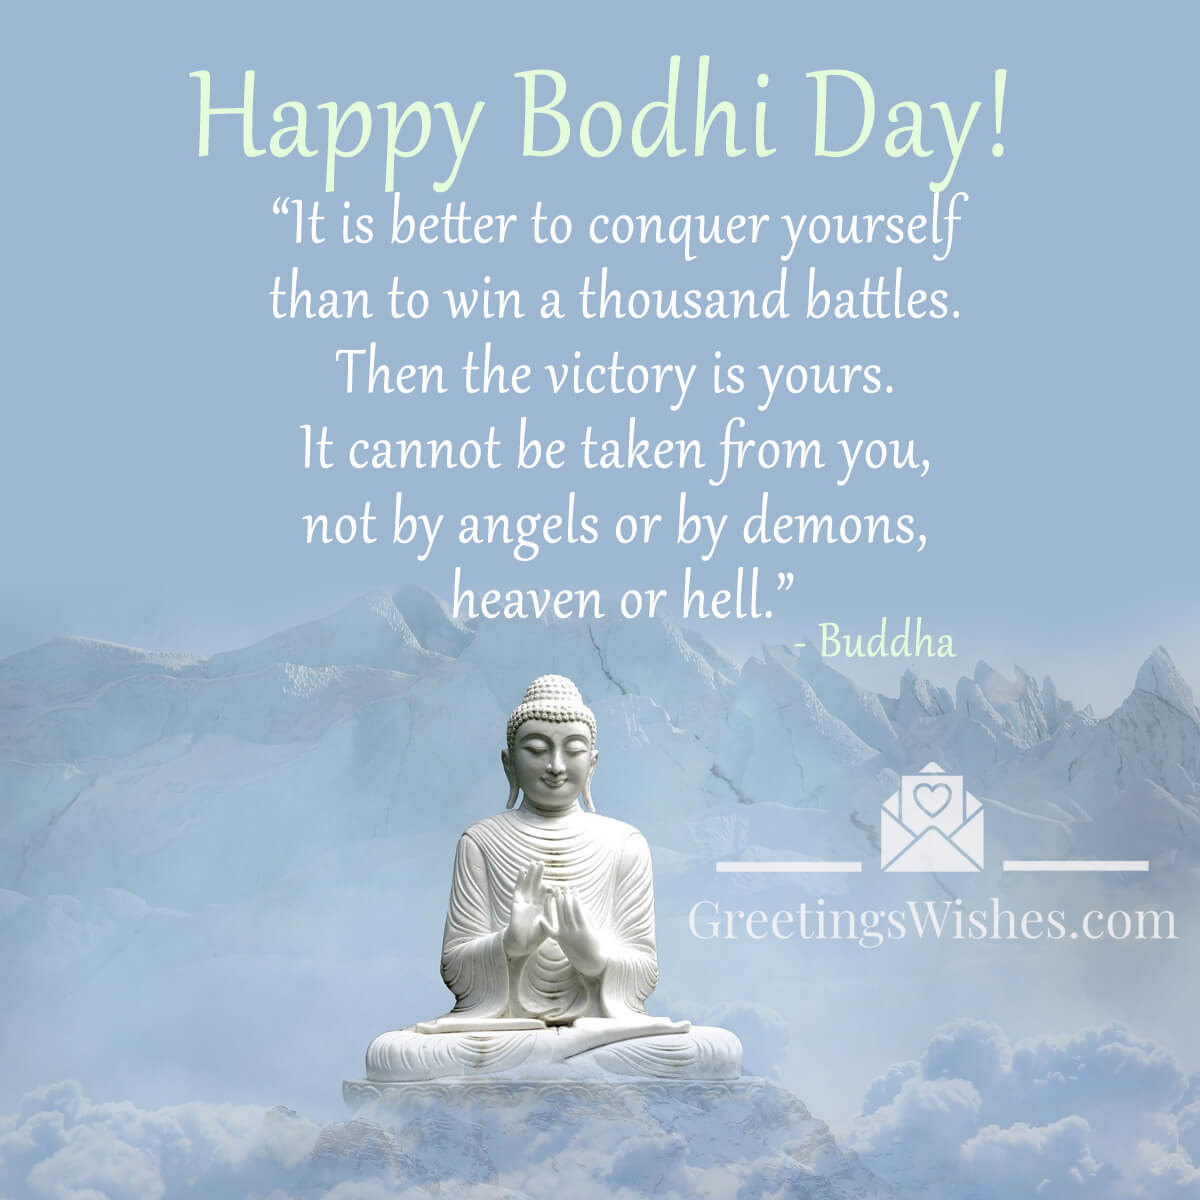 Bodhi Day Wishes